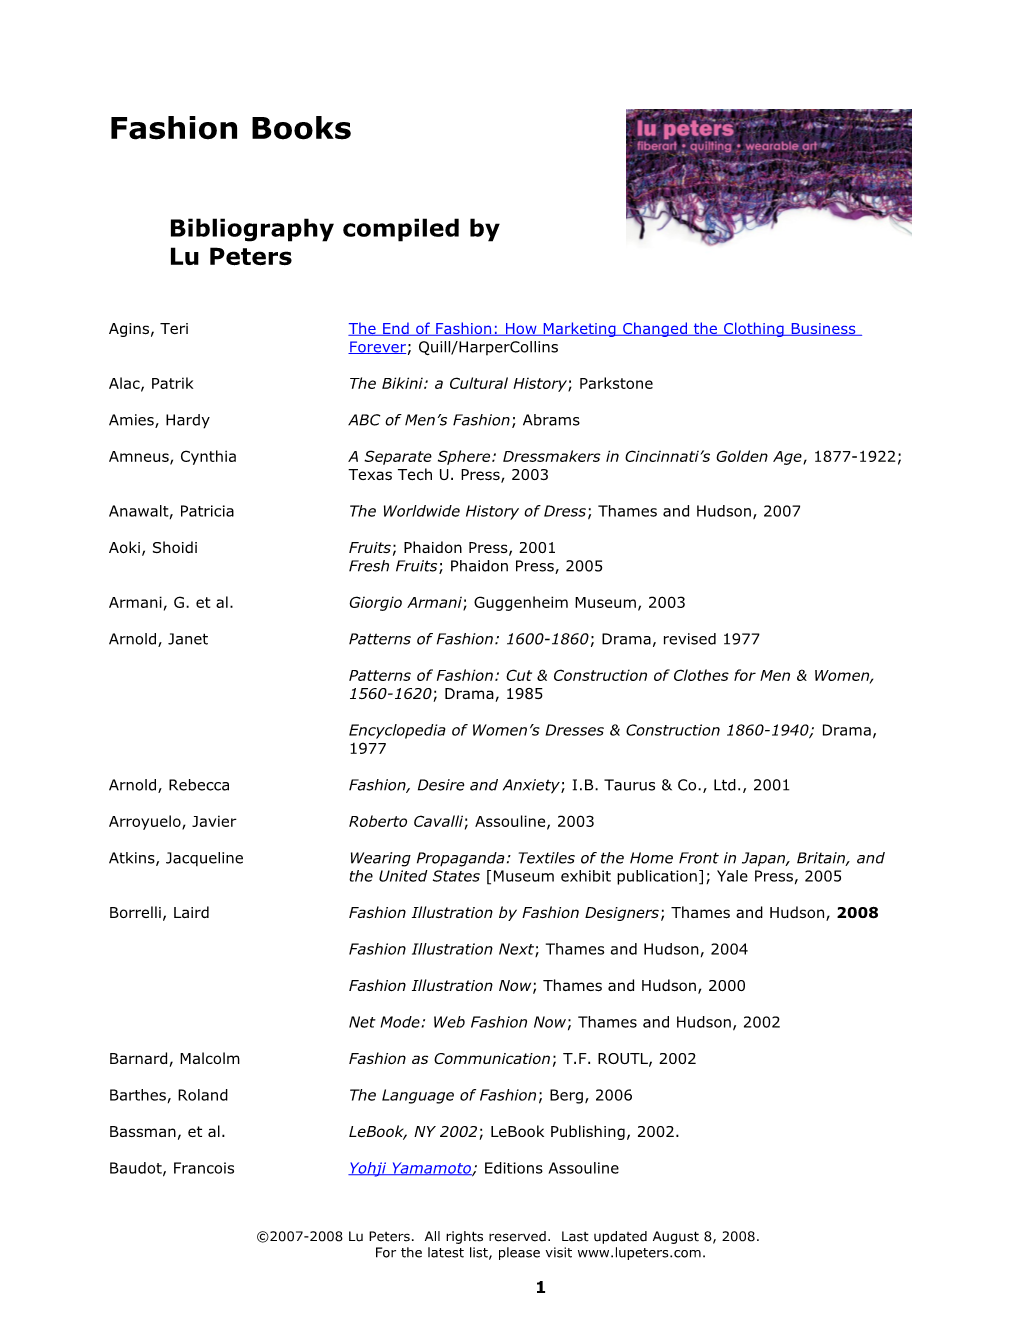 Bibliography Compiled by Lu Peters